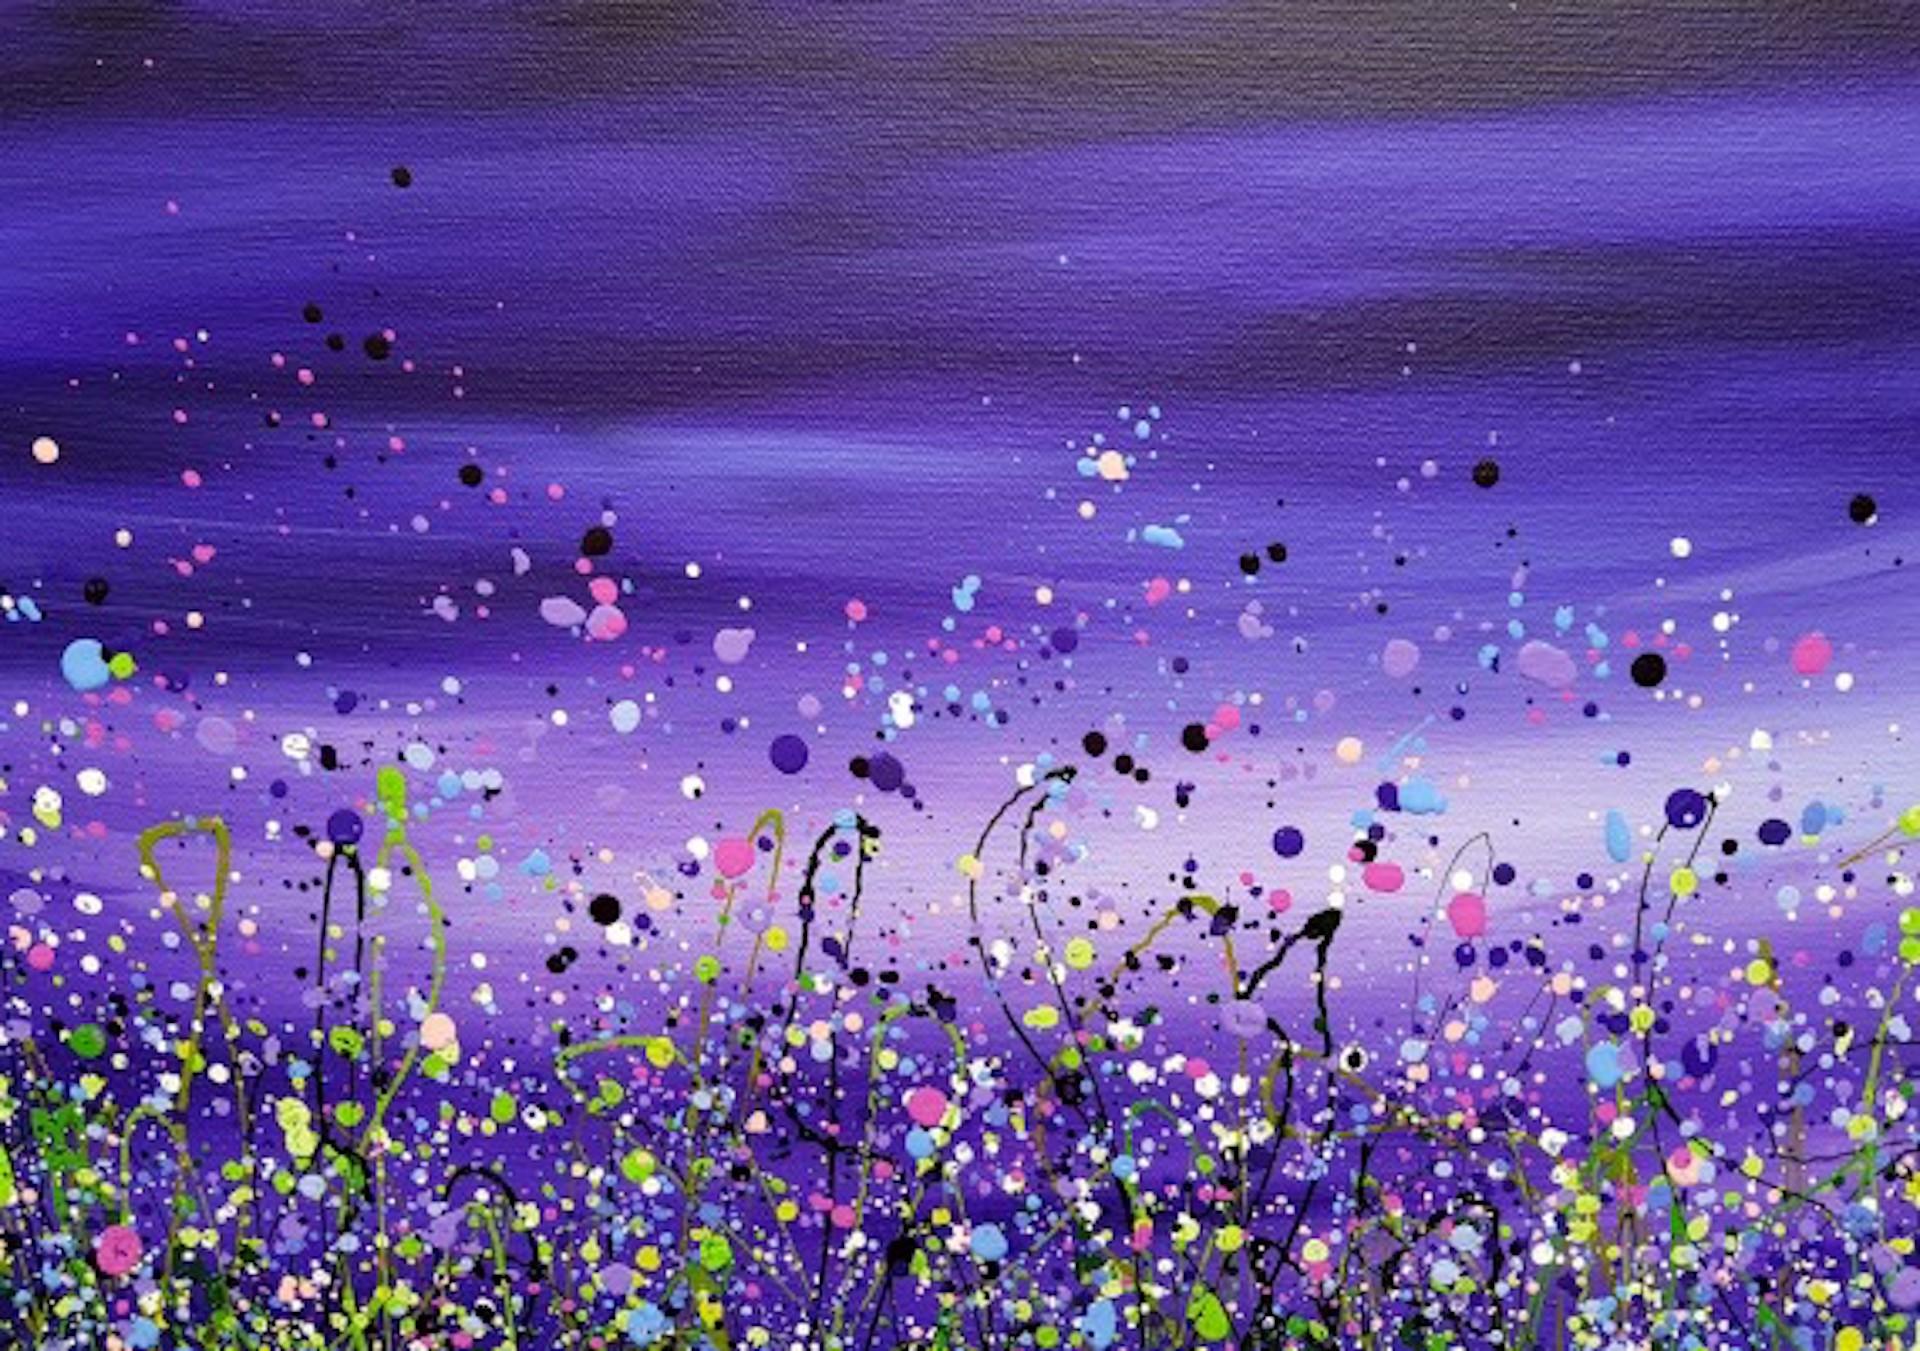 Amethyst Dream 3 By Lucy Moore [2021]
original

acrylic On canvas

Image size: H:60 cm x W:60 cm

Complete Size of Unframed Work: H:60 cm x W:60 cm x D:1.5cm

Sold Unframed

Please note that insitu images are purely an indication of how a piece may